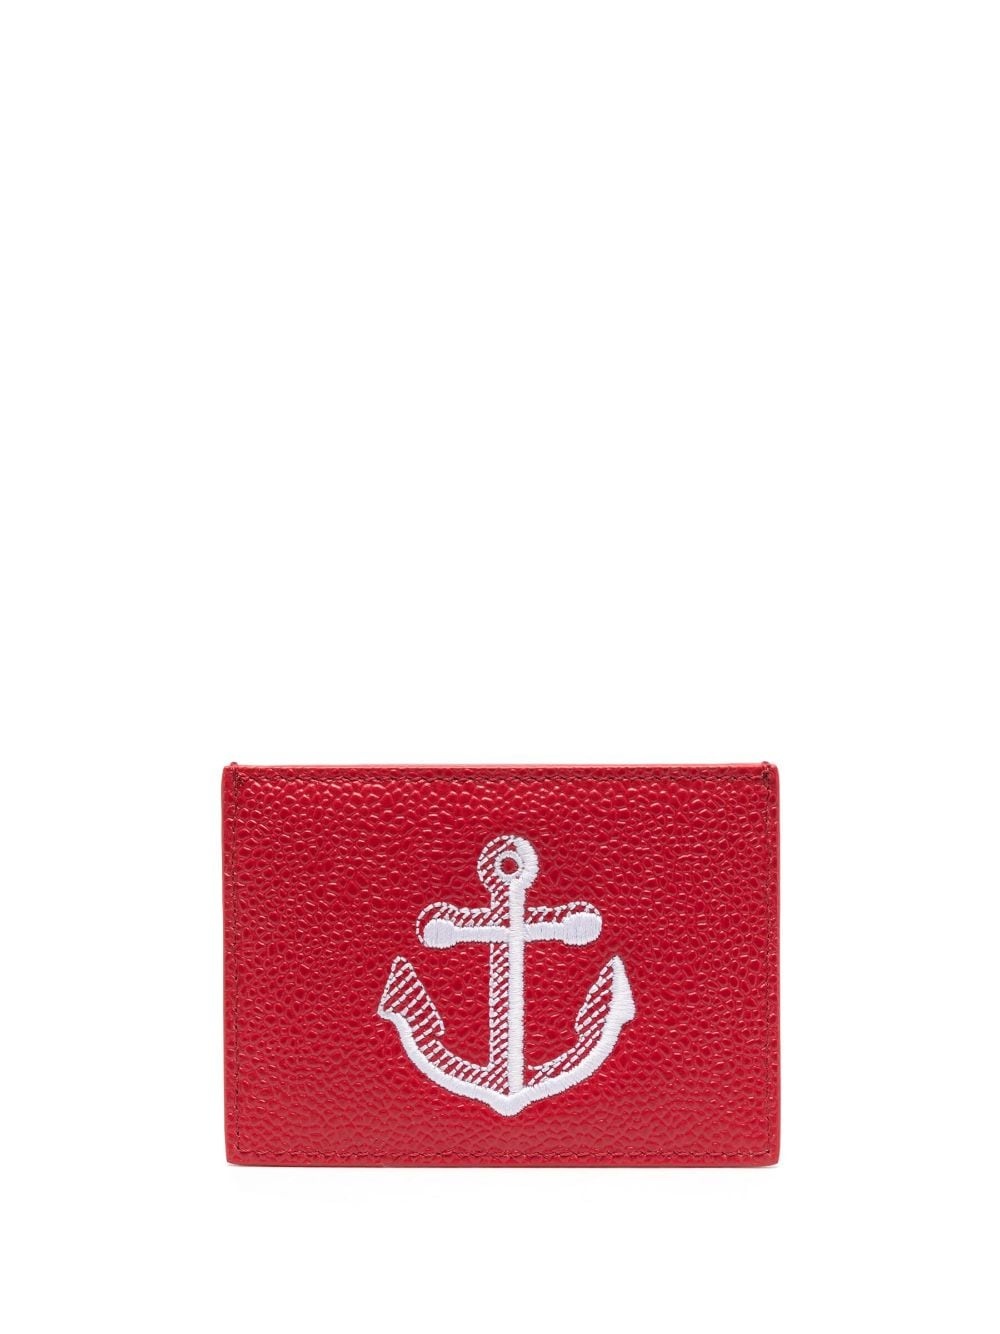 anchor-embroidered leather cardholder - 1